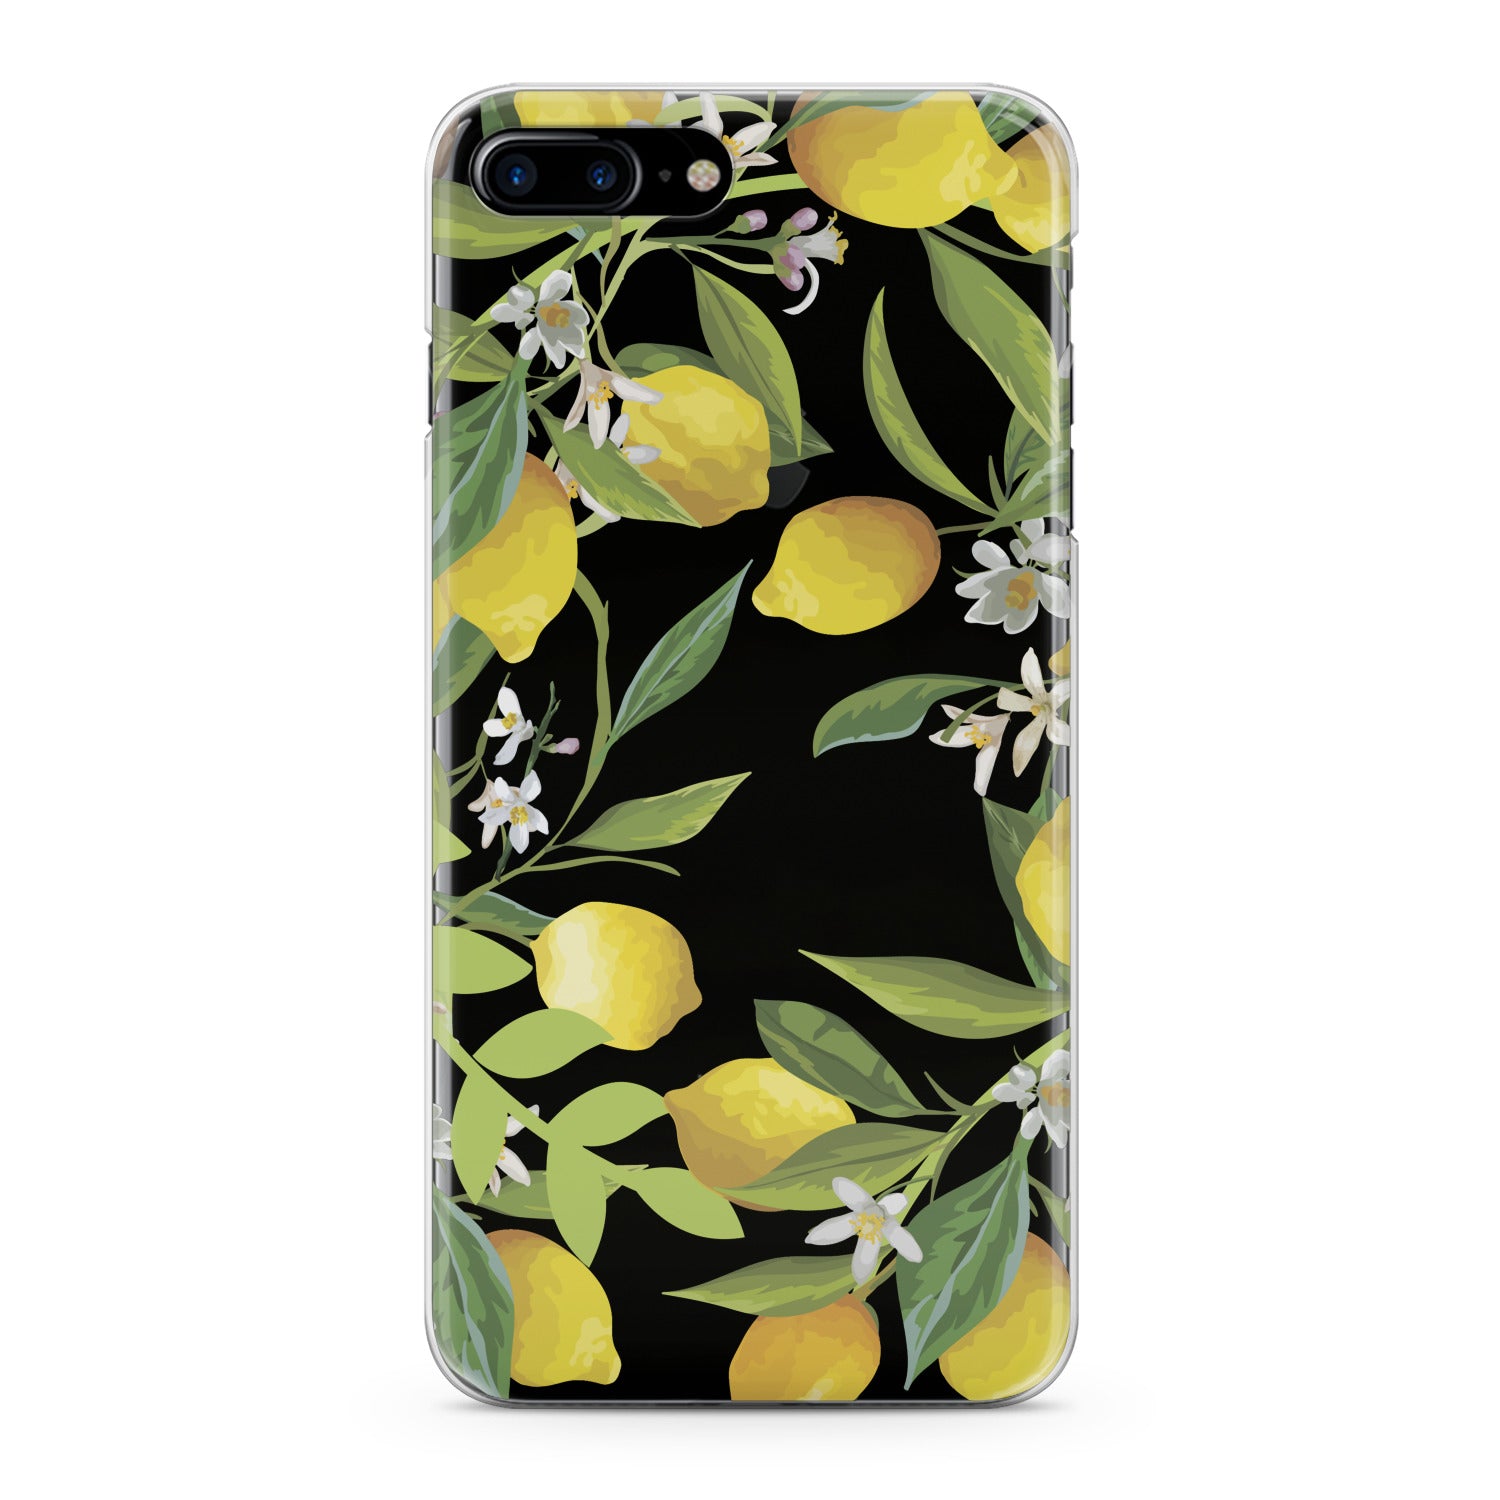 Lex Altern Blossom Lemons Phone Case for your iPhone & Android phone.